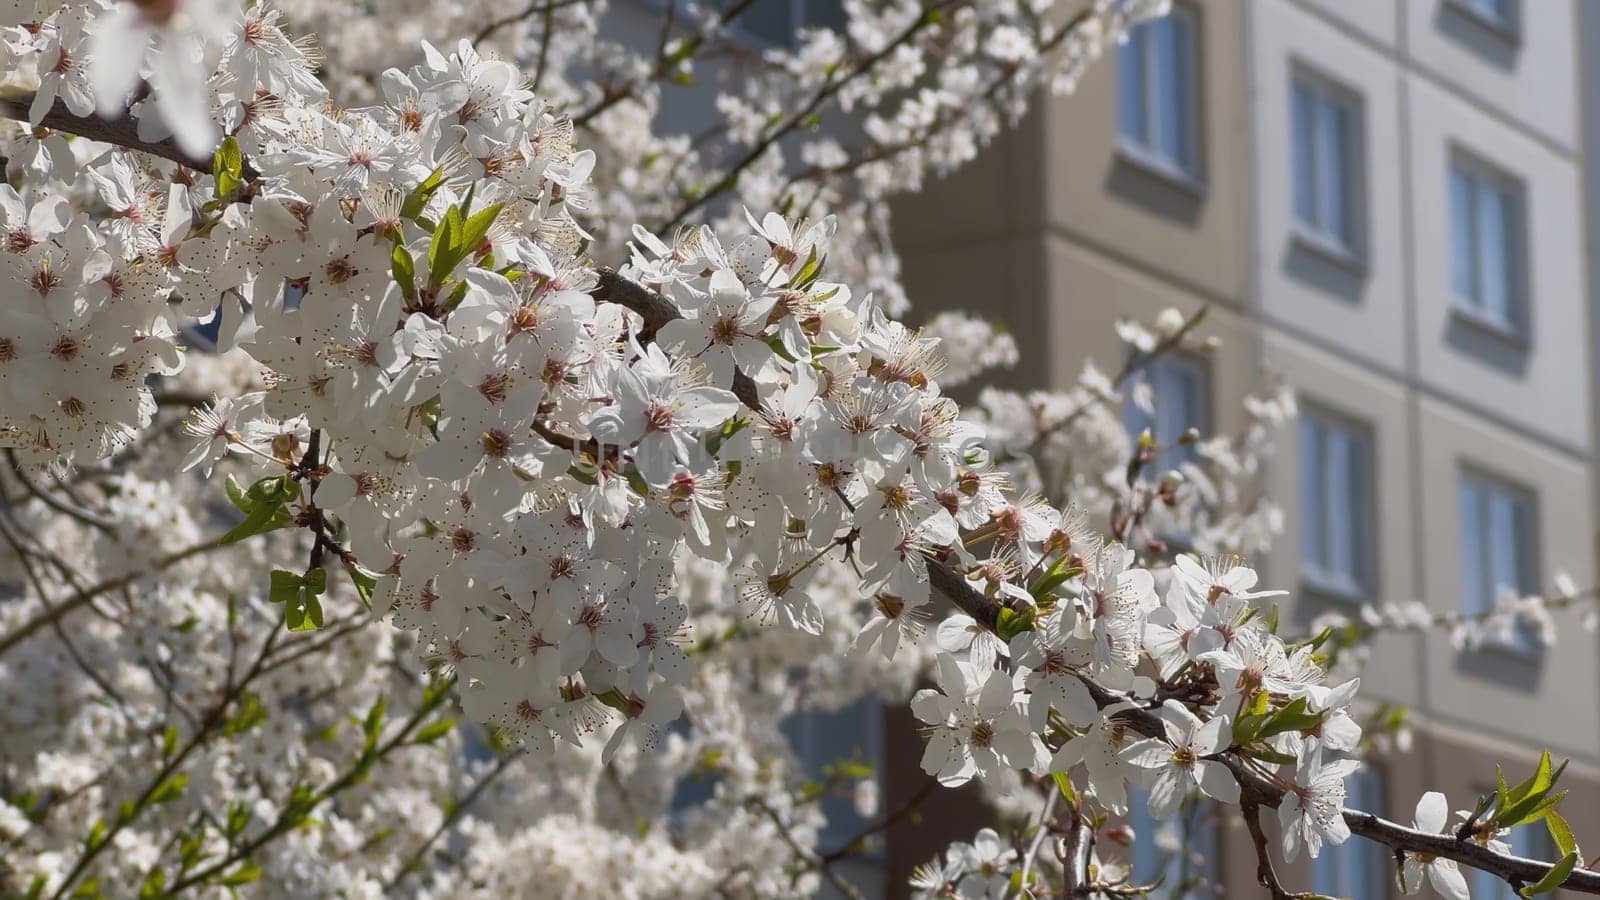 White flowers on a tree on a spring day in the city. by DovidPro